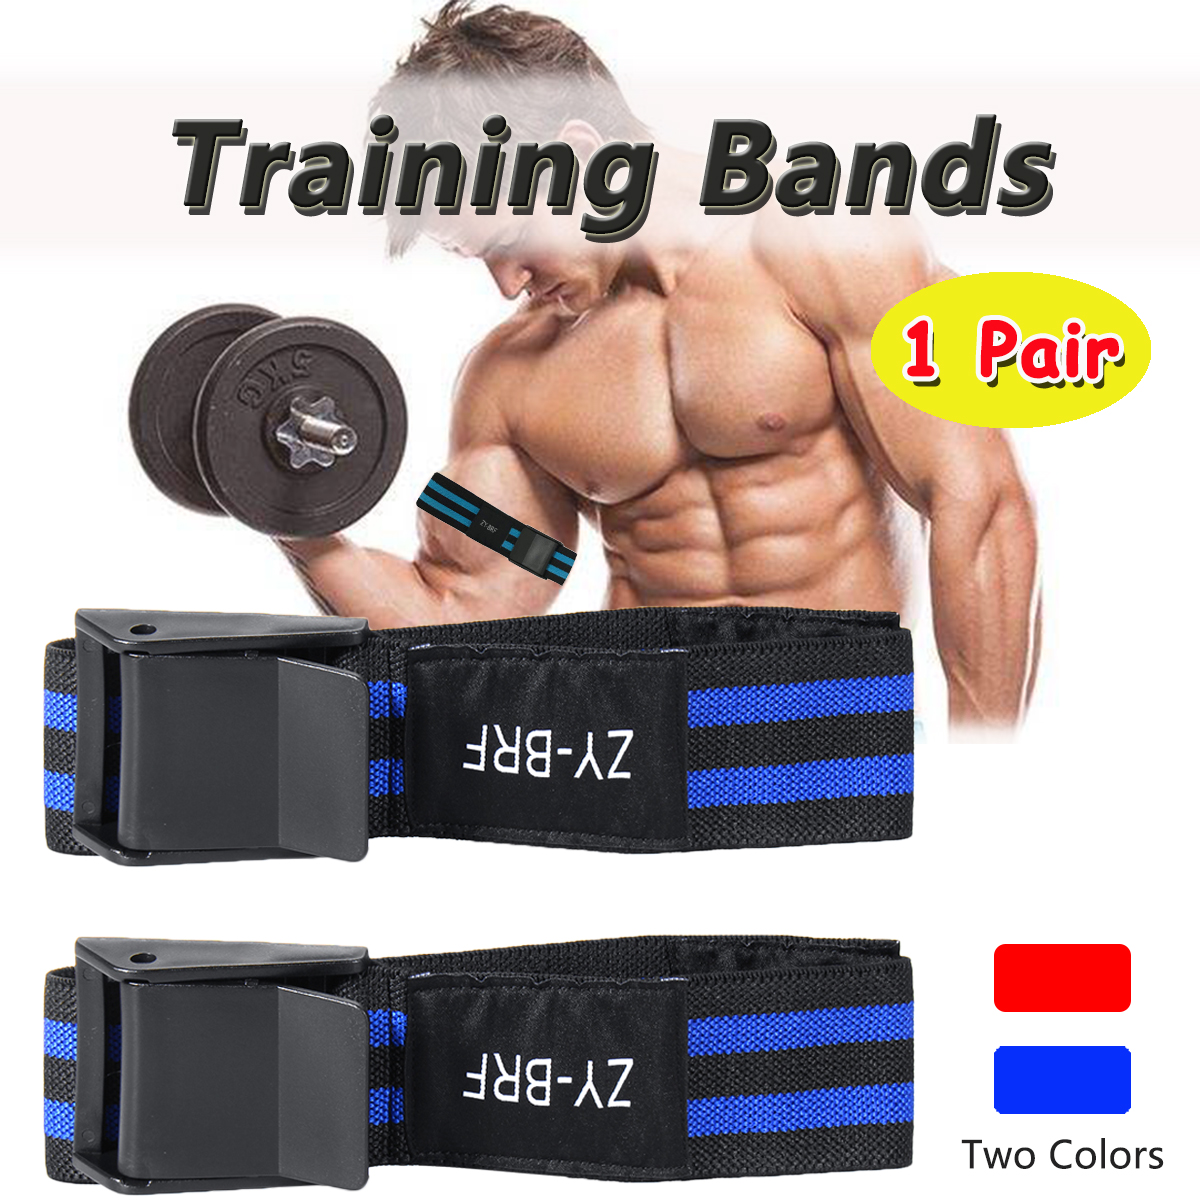 2 Pcs Bands Occlusion Training Bands Restriction Bands